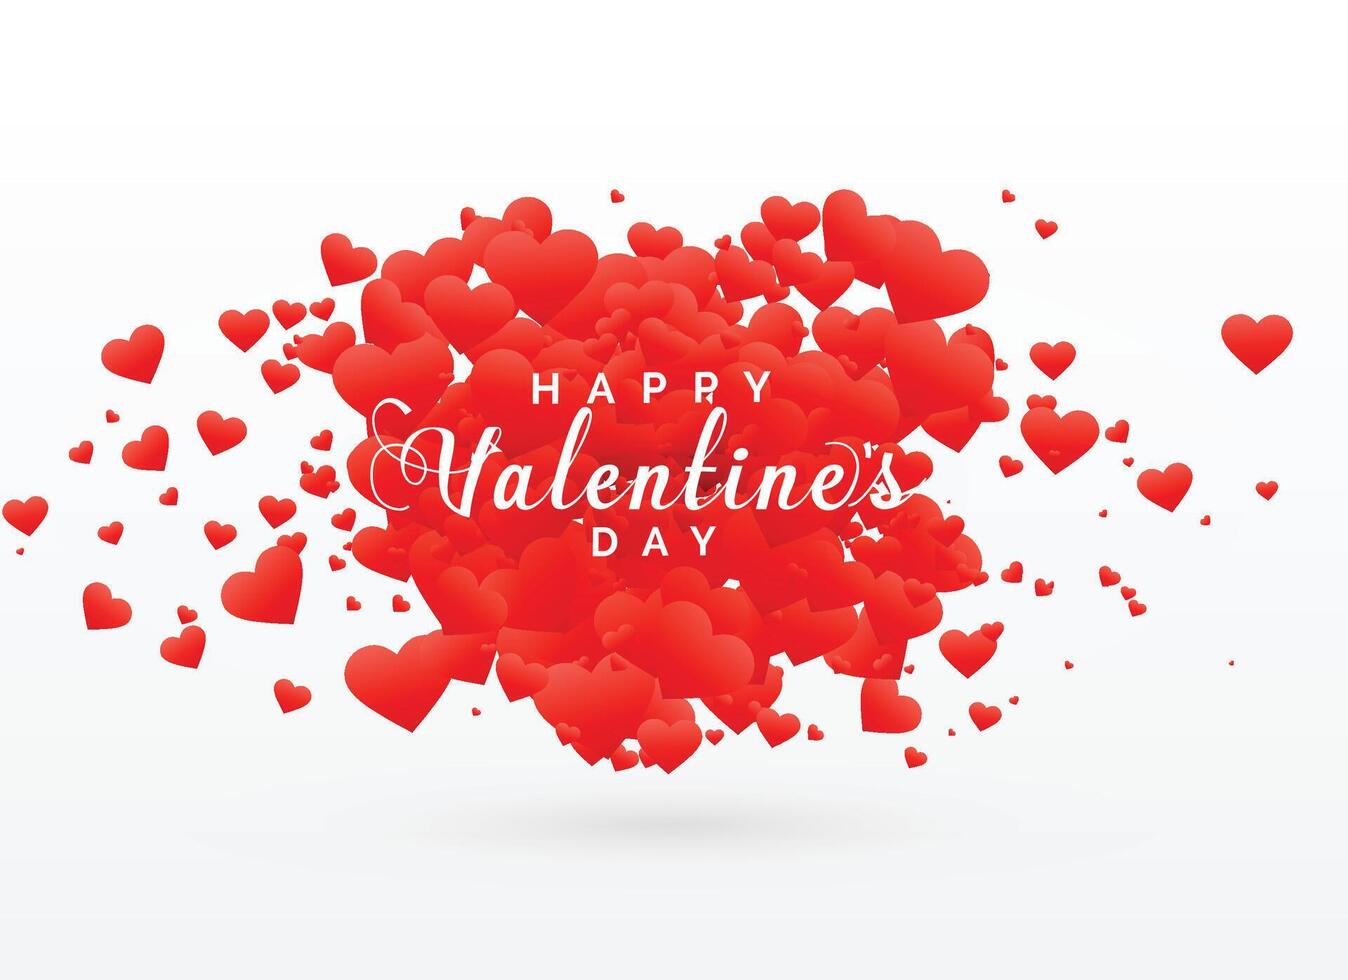 valentine's day card design with scattered red hearts vector